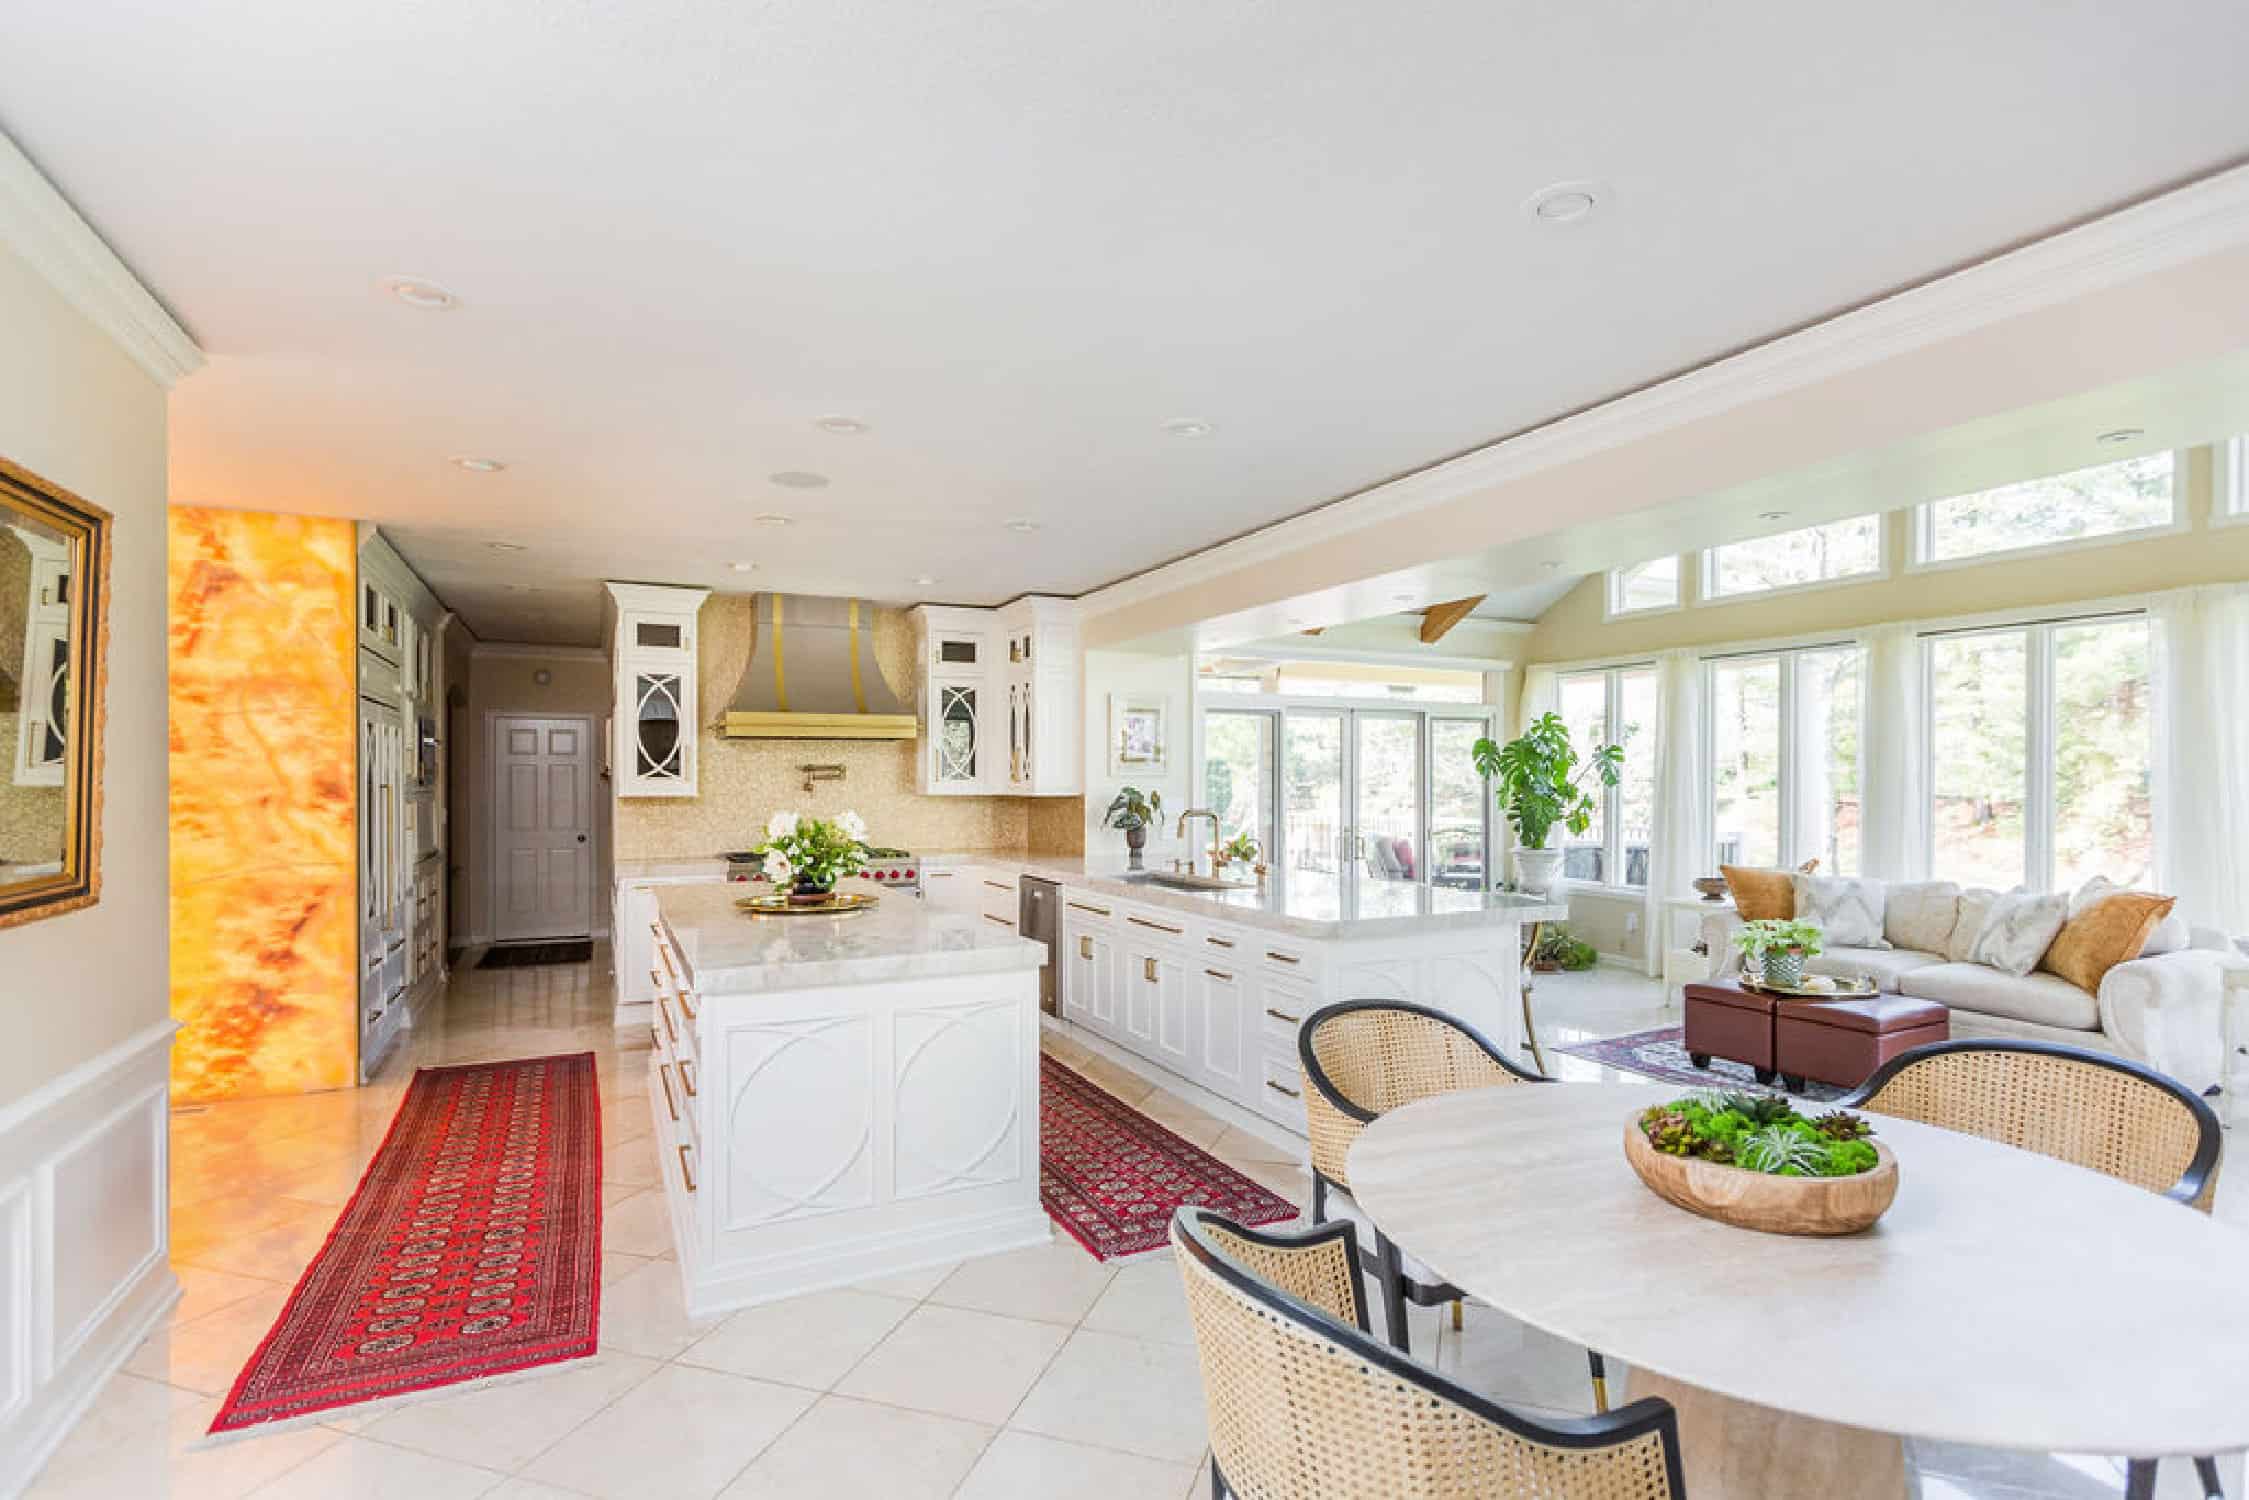 Nicholas Design Build | A large kitchen with a remodeled dining table and chairs.